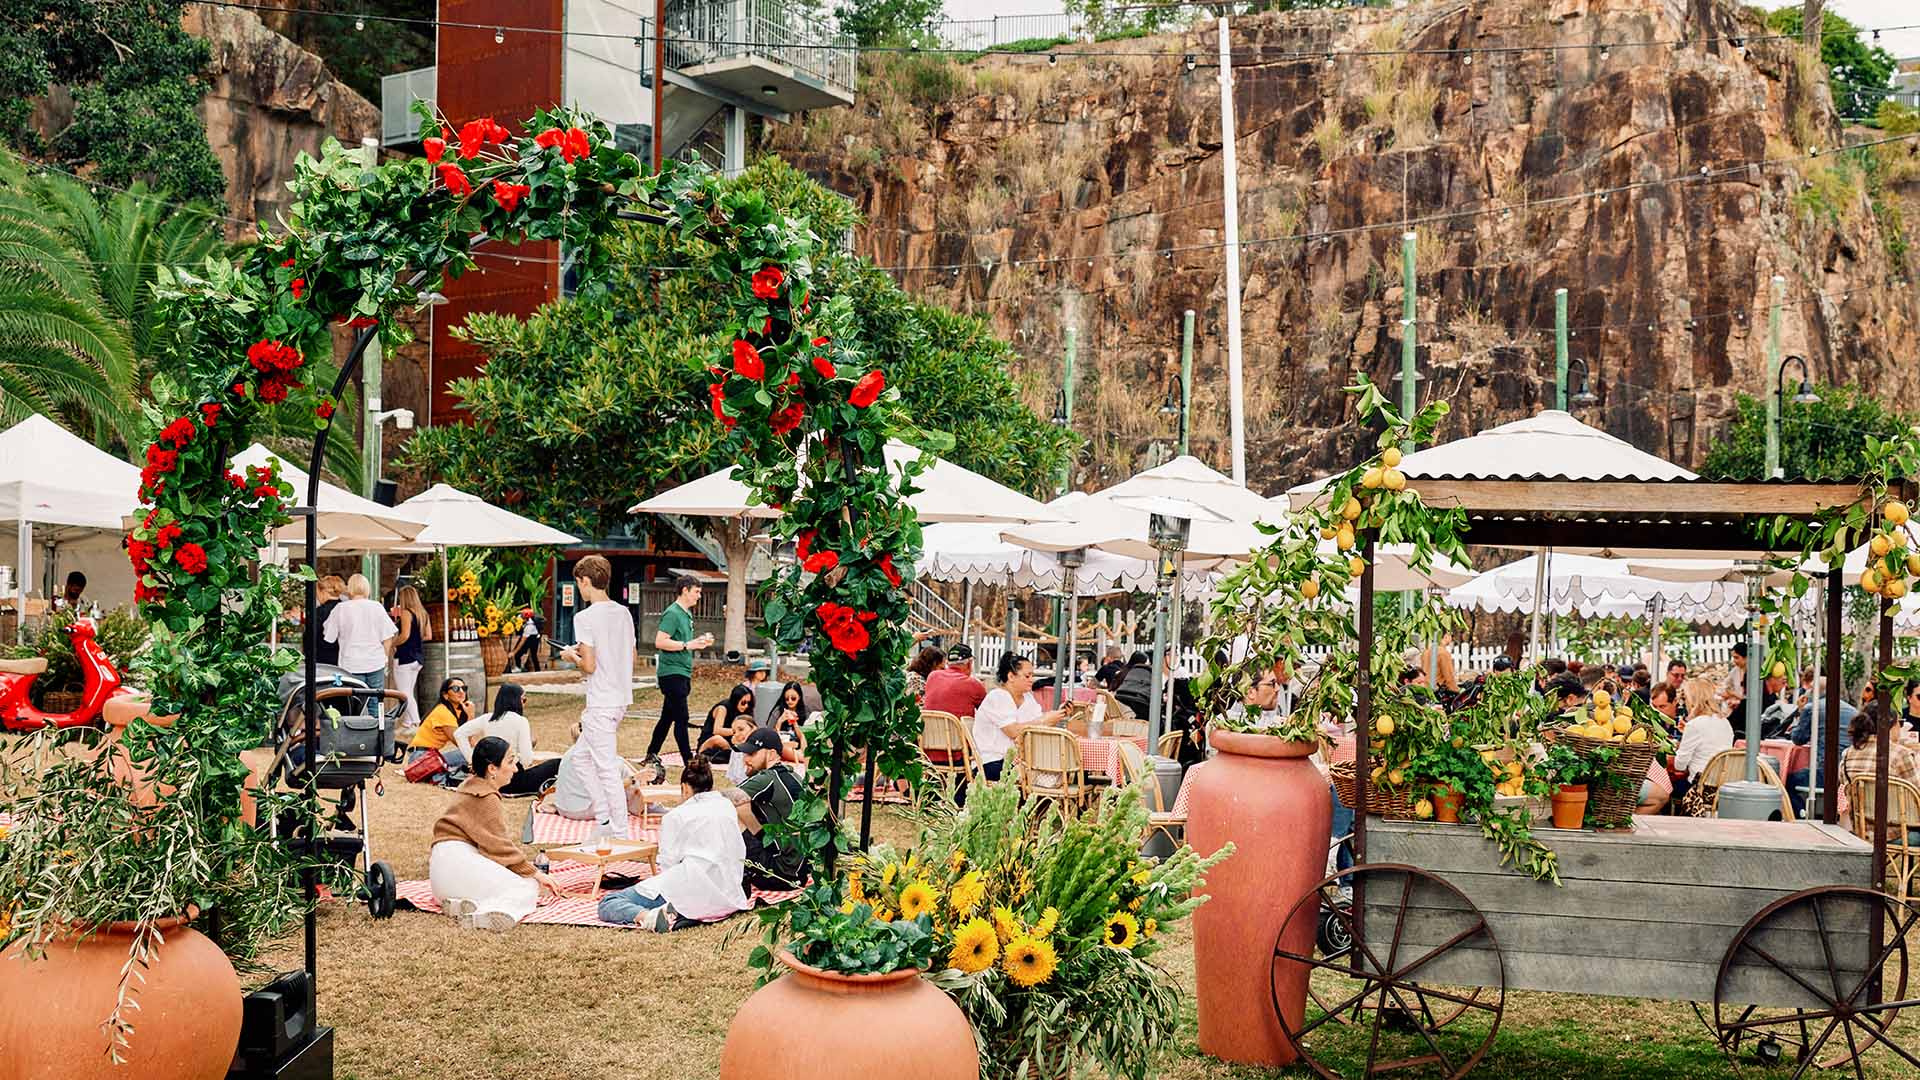 The Best Things to Do in Brisbane This Weekend